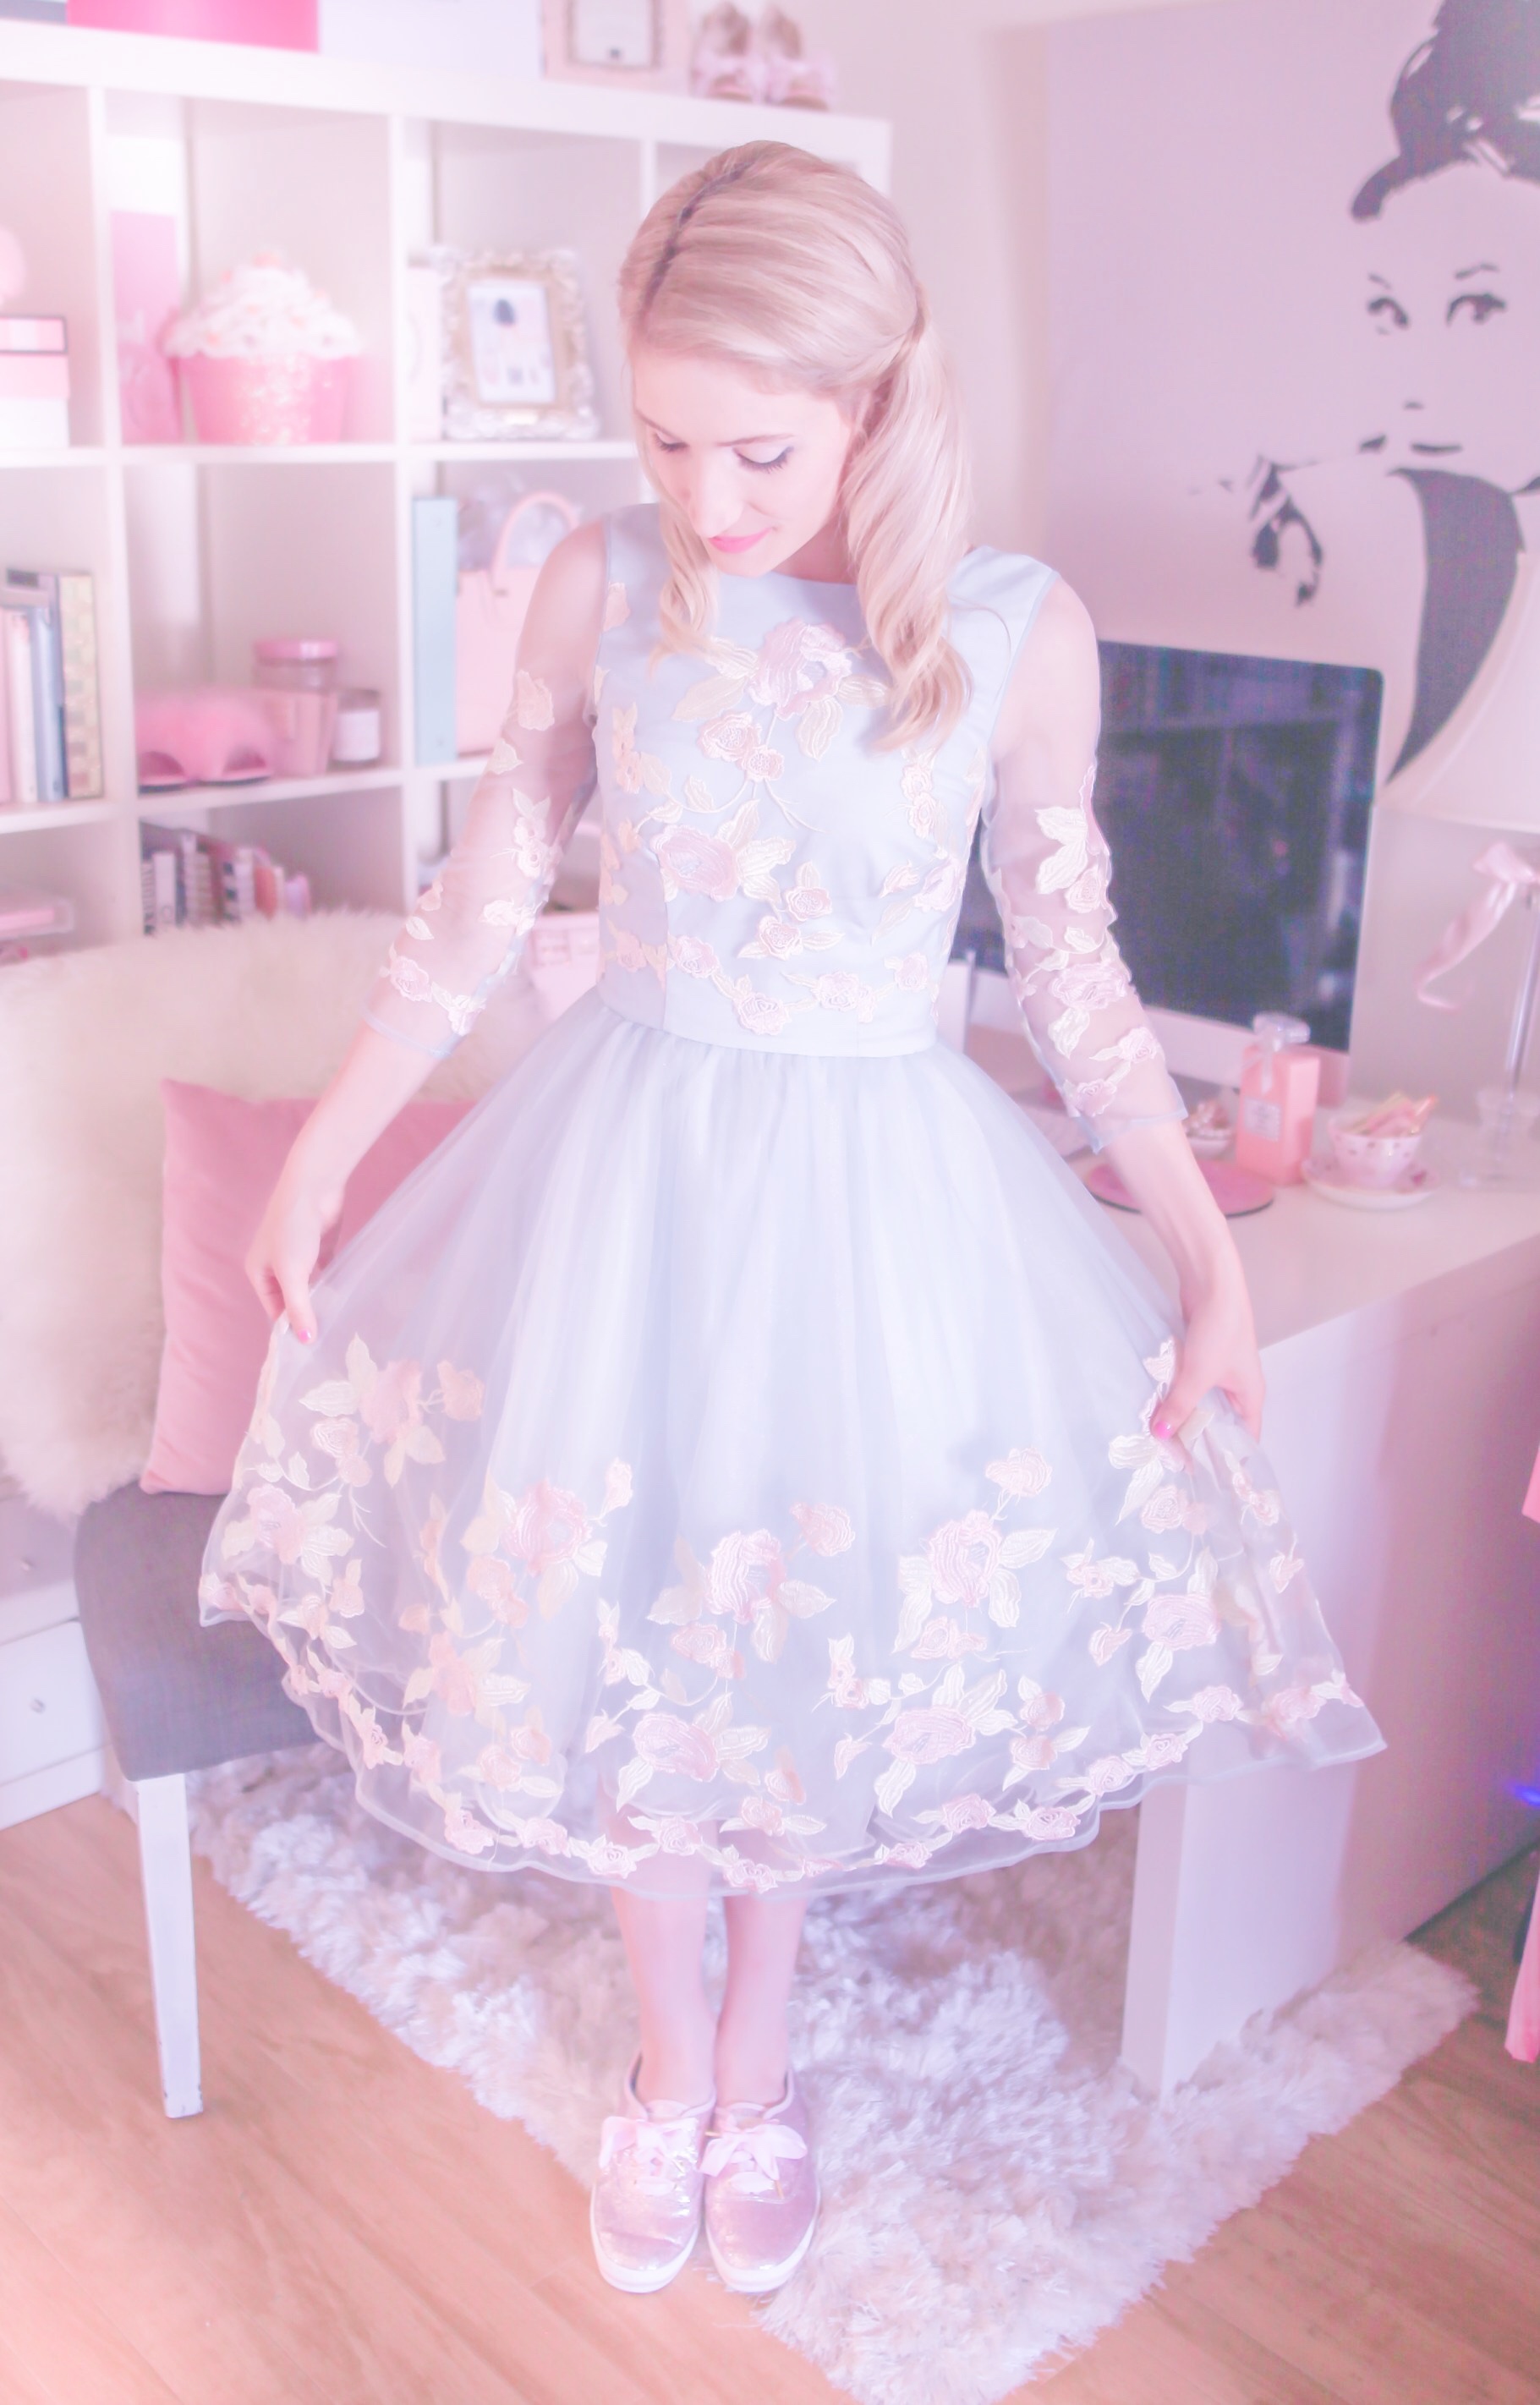 How To Pull Off Wearing A Fairytale Dress